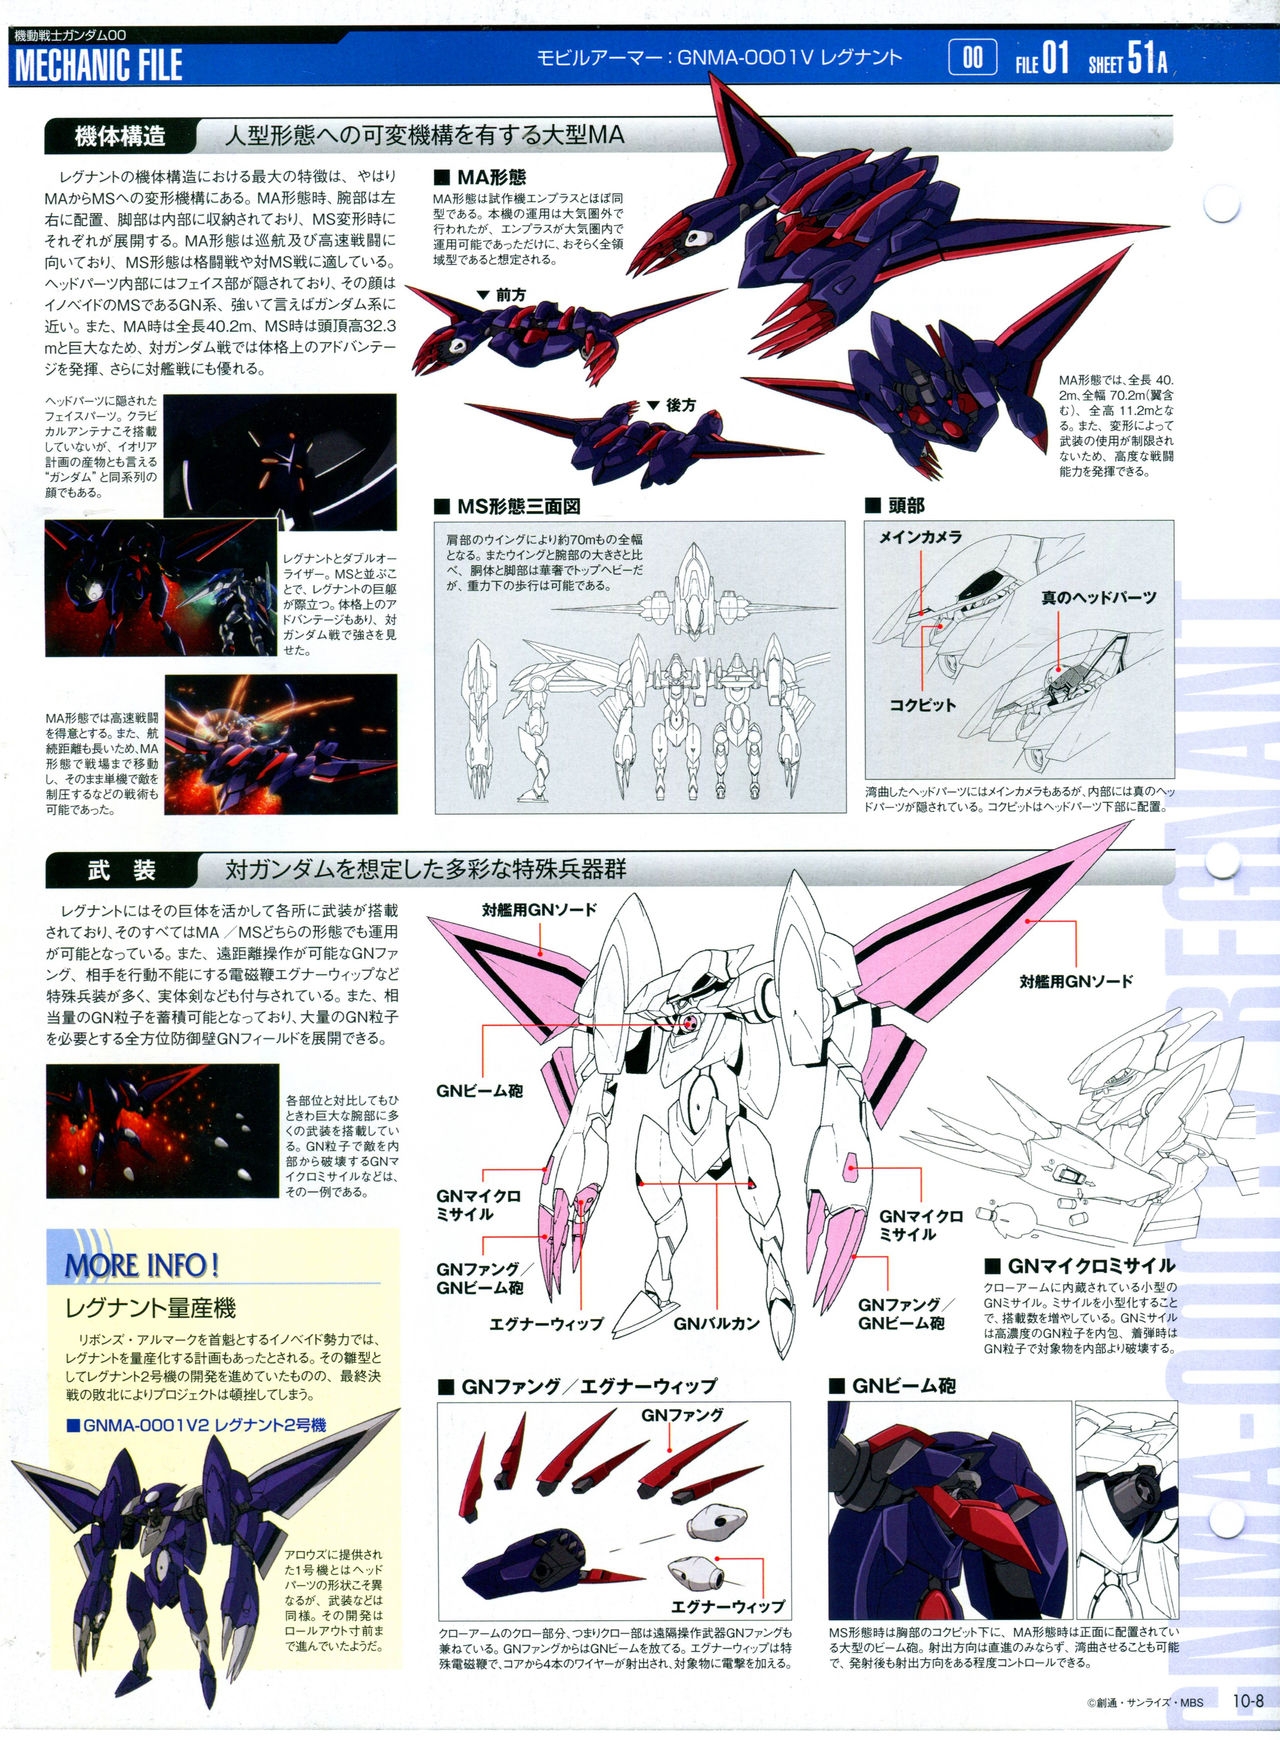 The Official Gundam Perfect File - No. 010 11